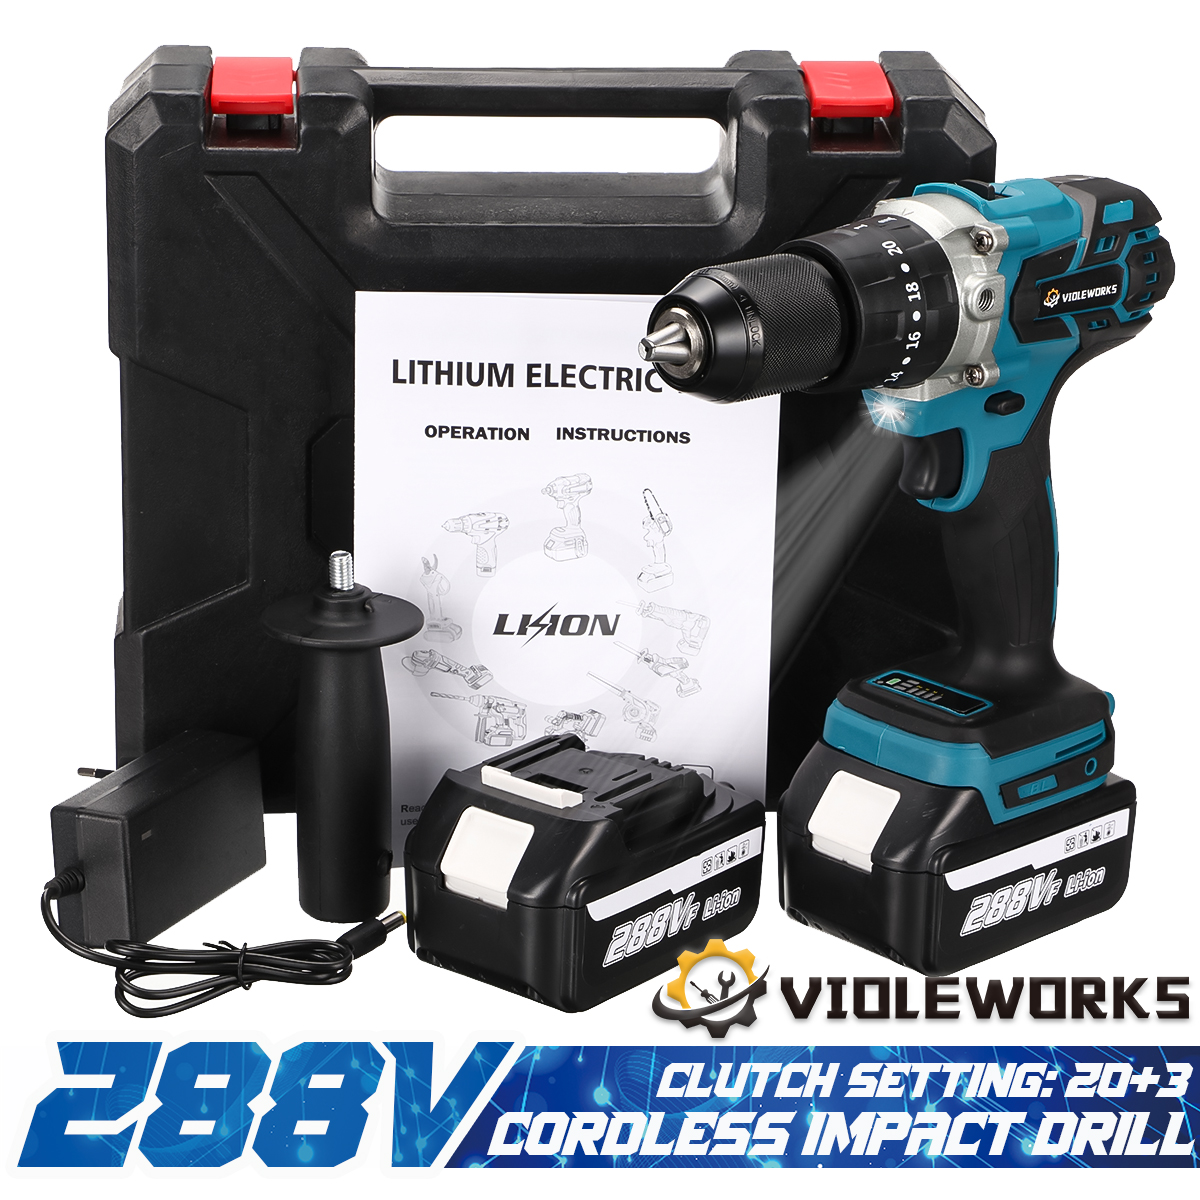 VIOLEWORKS-3-IN-1-288VF-Cordless-Brushless-Hammer-Drill-Speed-Regulated-Electric-Screwdriver-Impact--1852902-1